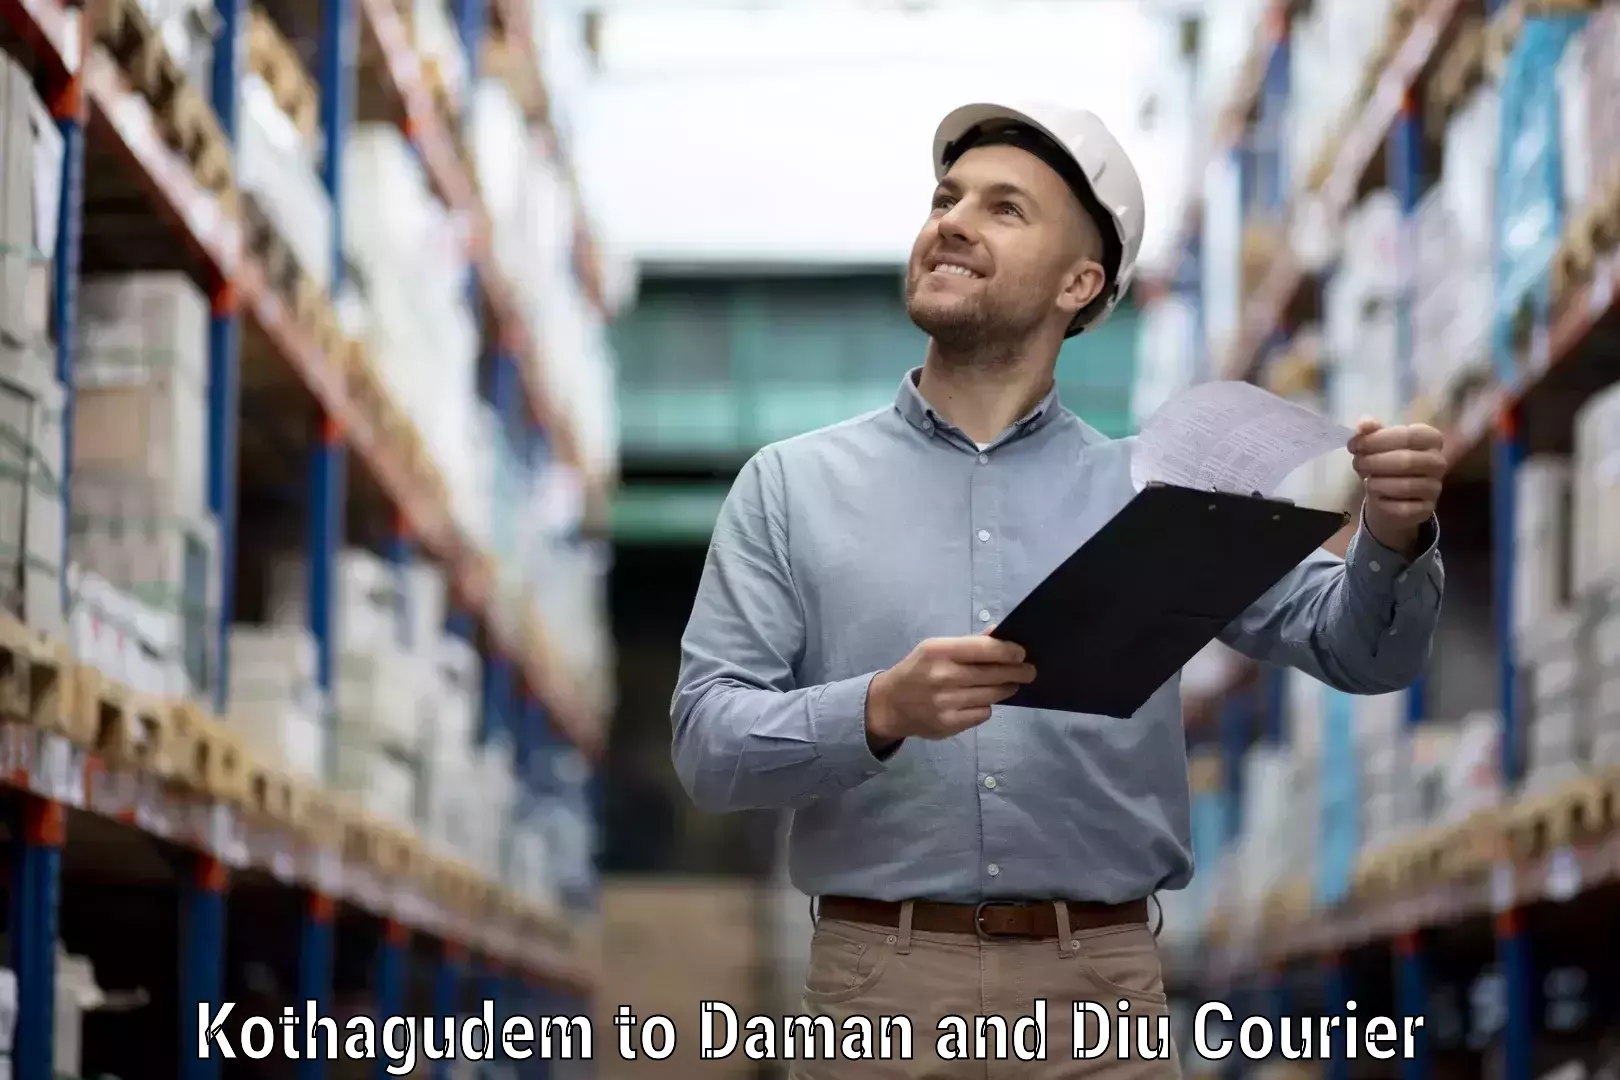 Courier service innovation Kothagudem to Daman and Diu